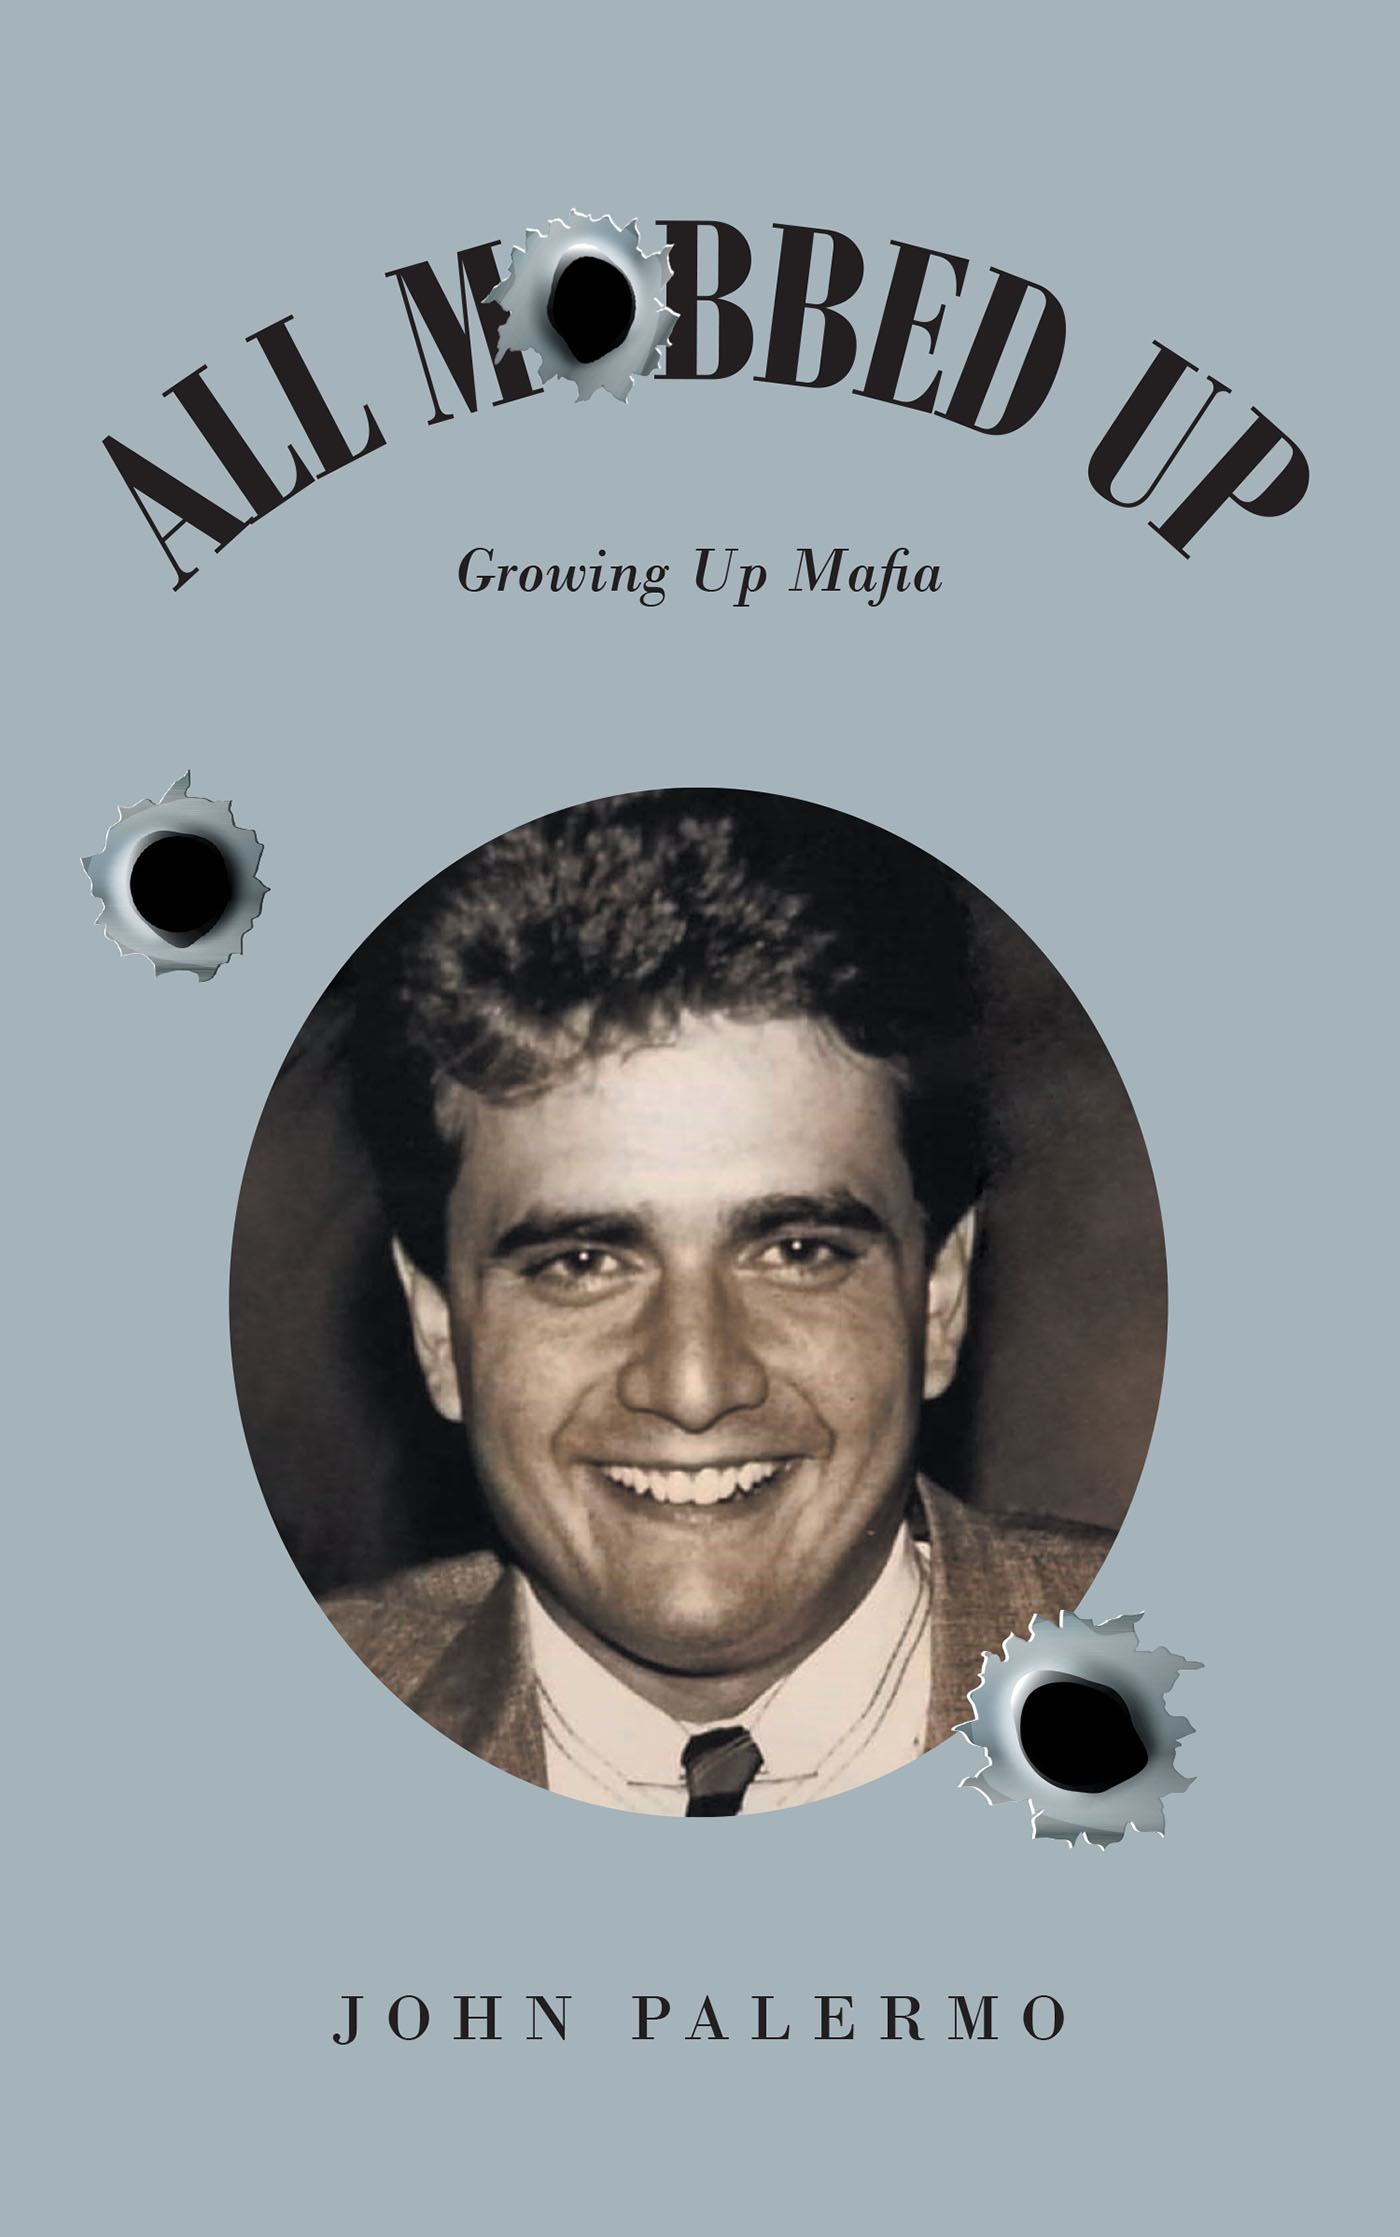 Author John Palermo’s New Book, "All Mobbed Up: Growing Up Mafia," is a Harrowing and Accurate Depiction of What Life Can be Like for Members of a Mafia Family